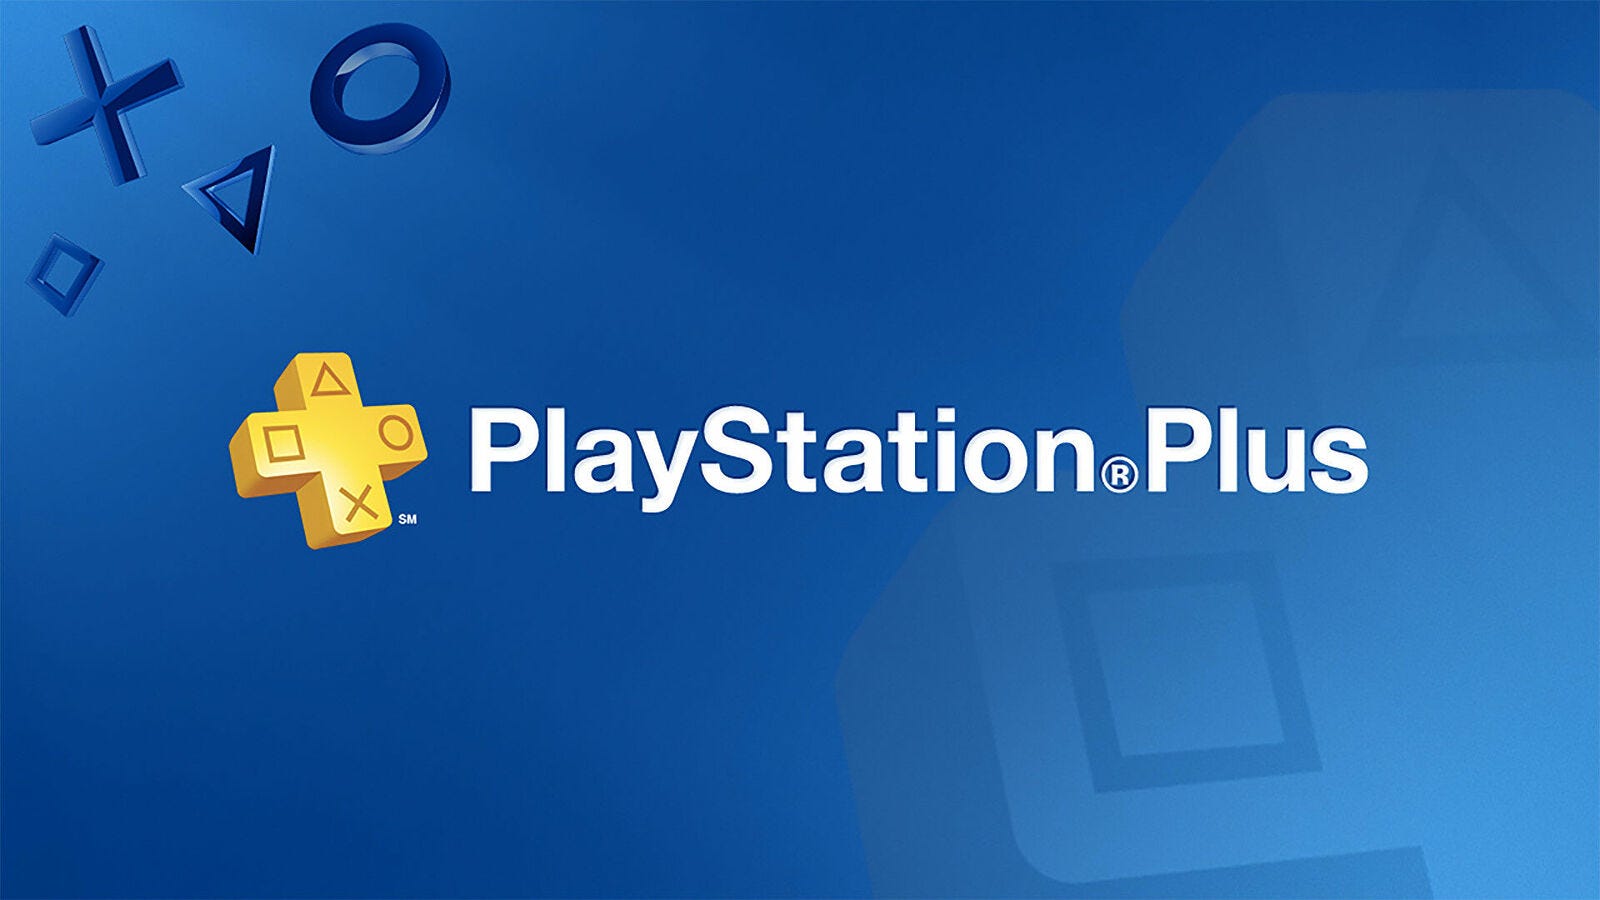 Weekend of free online play for PlayStation 4